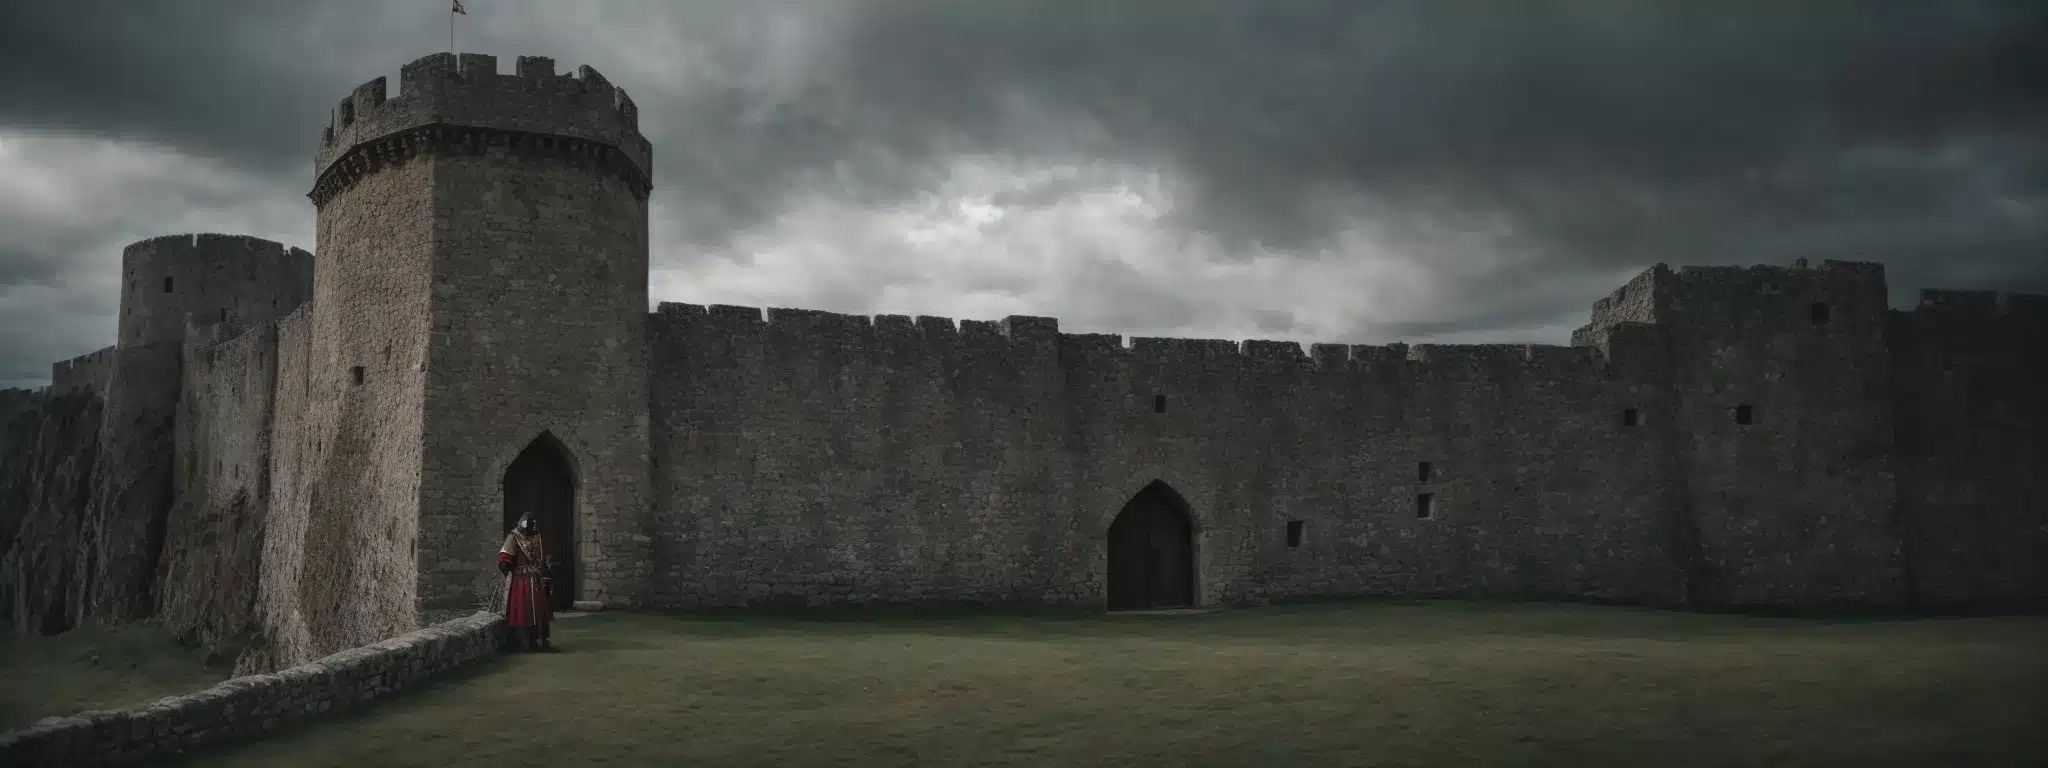 A Medieval Knight Stands Guard At The Towering Gates Of A Stone Fortress Under A Brooding Sky.